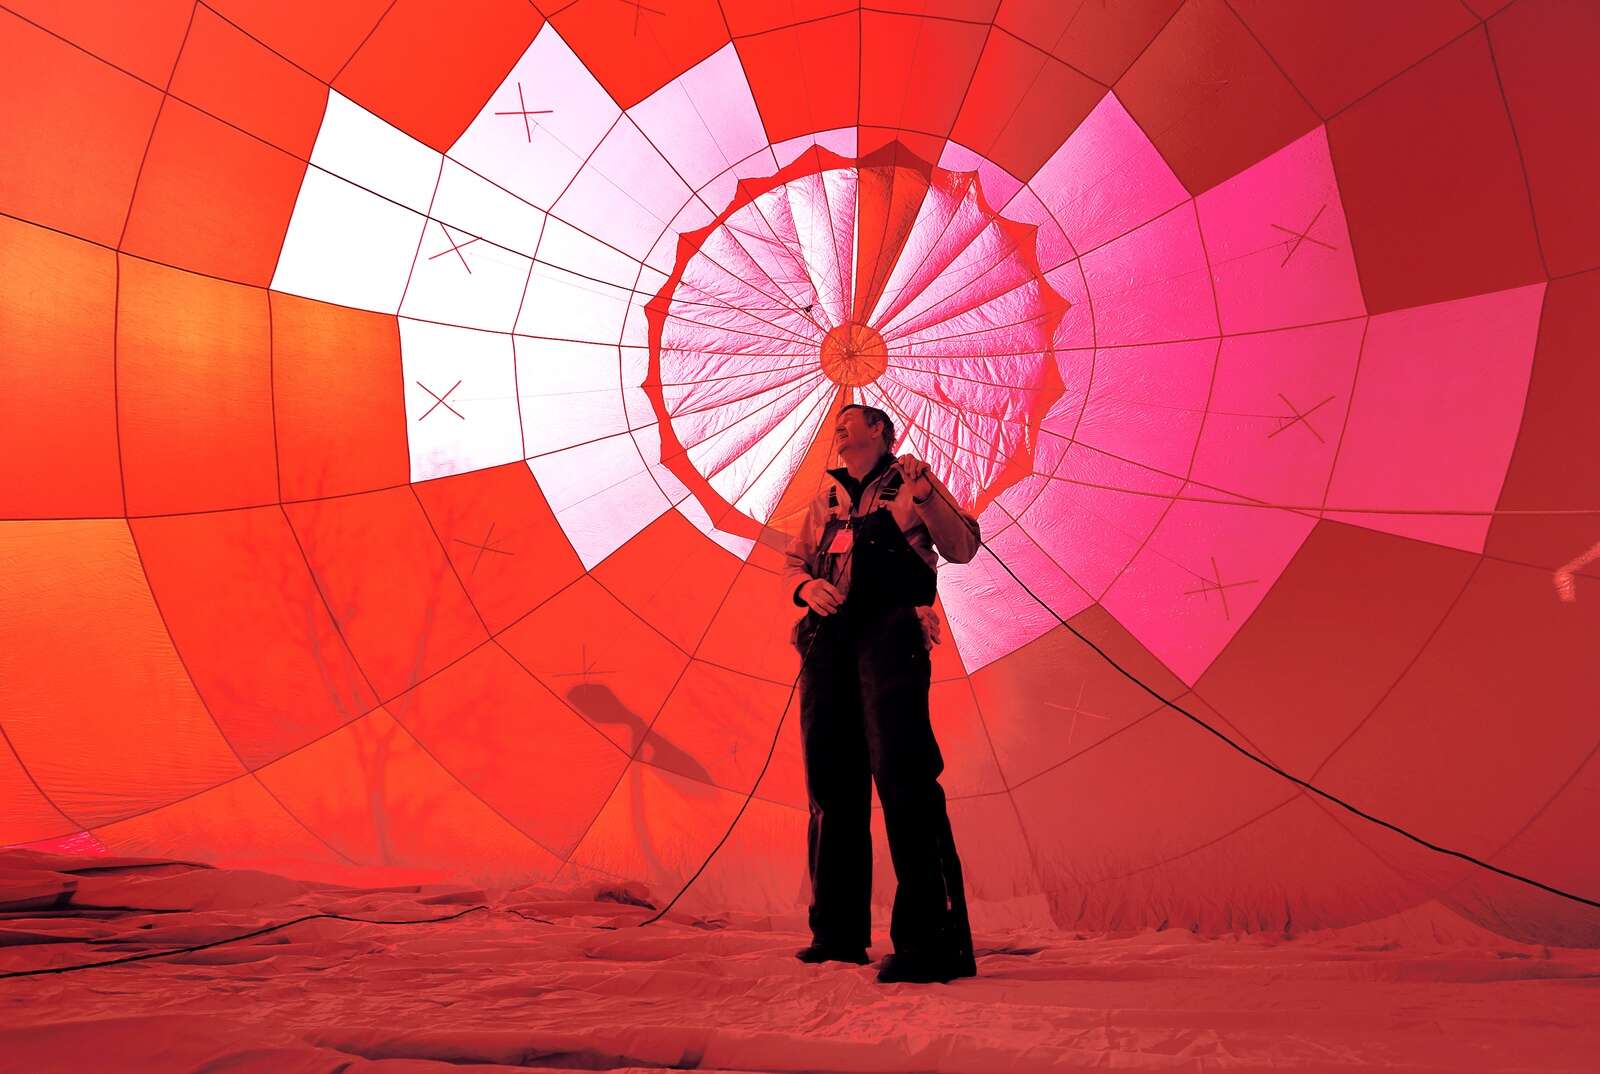 Photos: Pilots test winds during Snowdown Balloon Rally – The